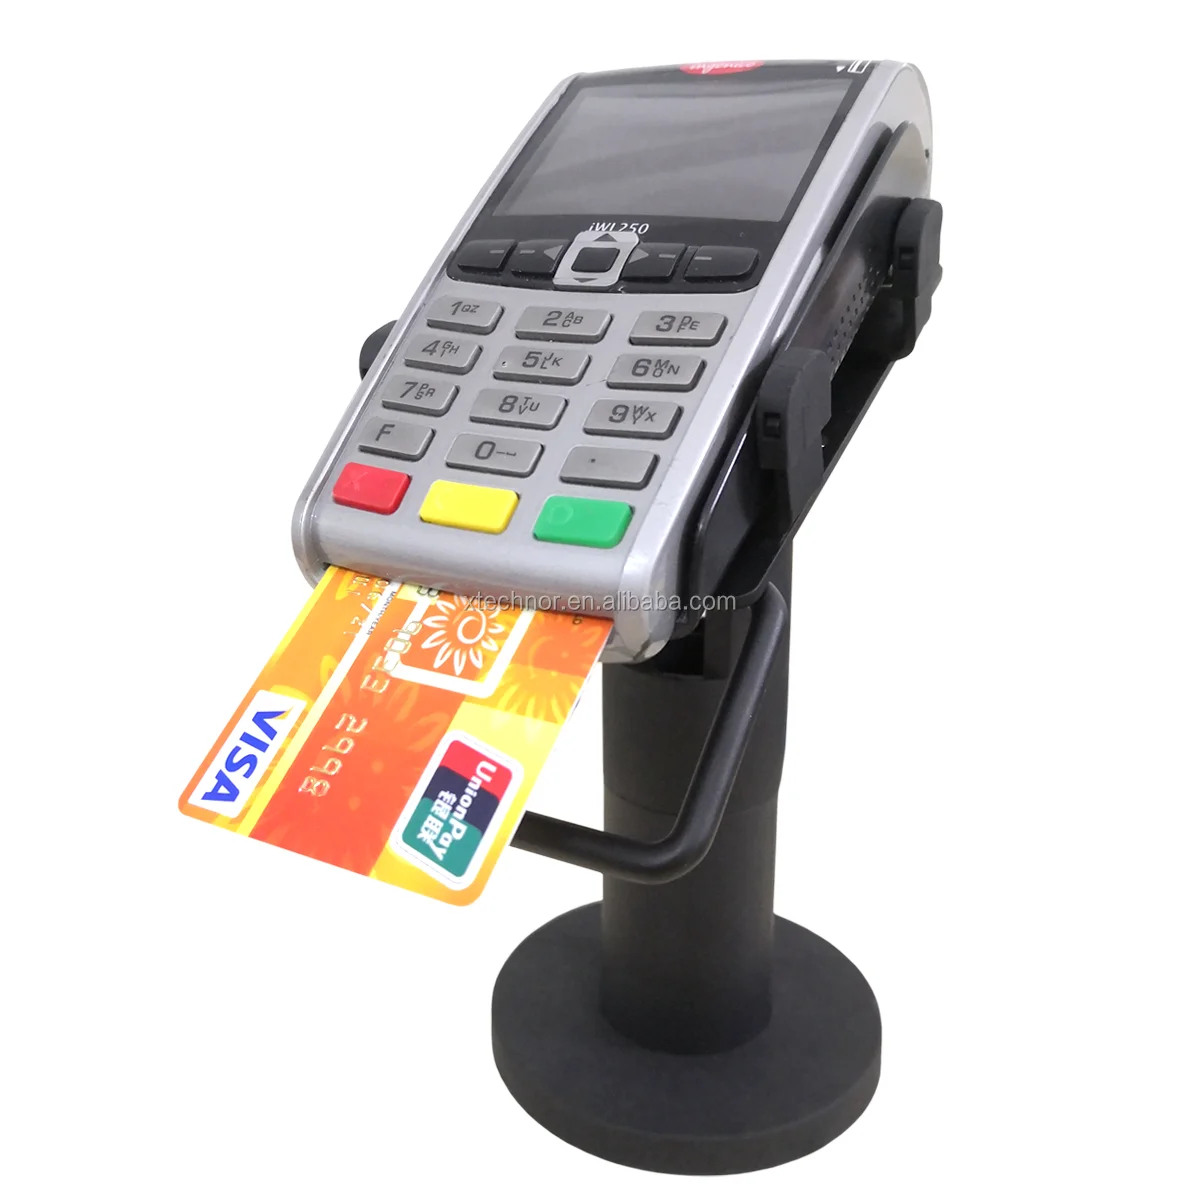 universal credit card terminal stand